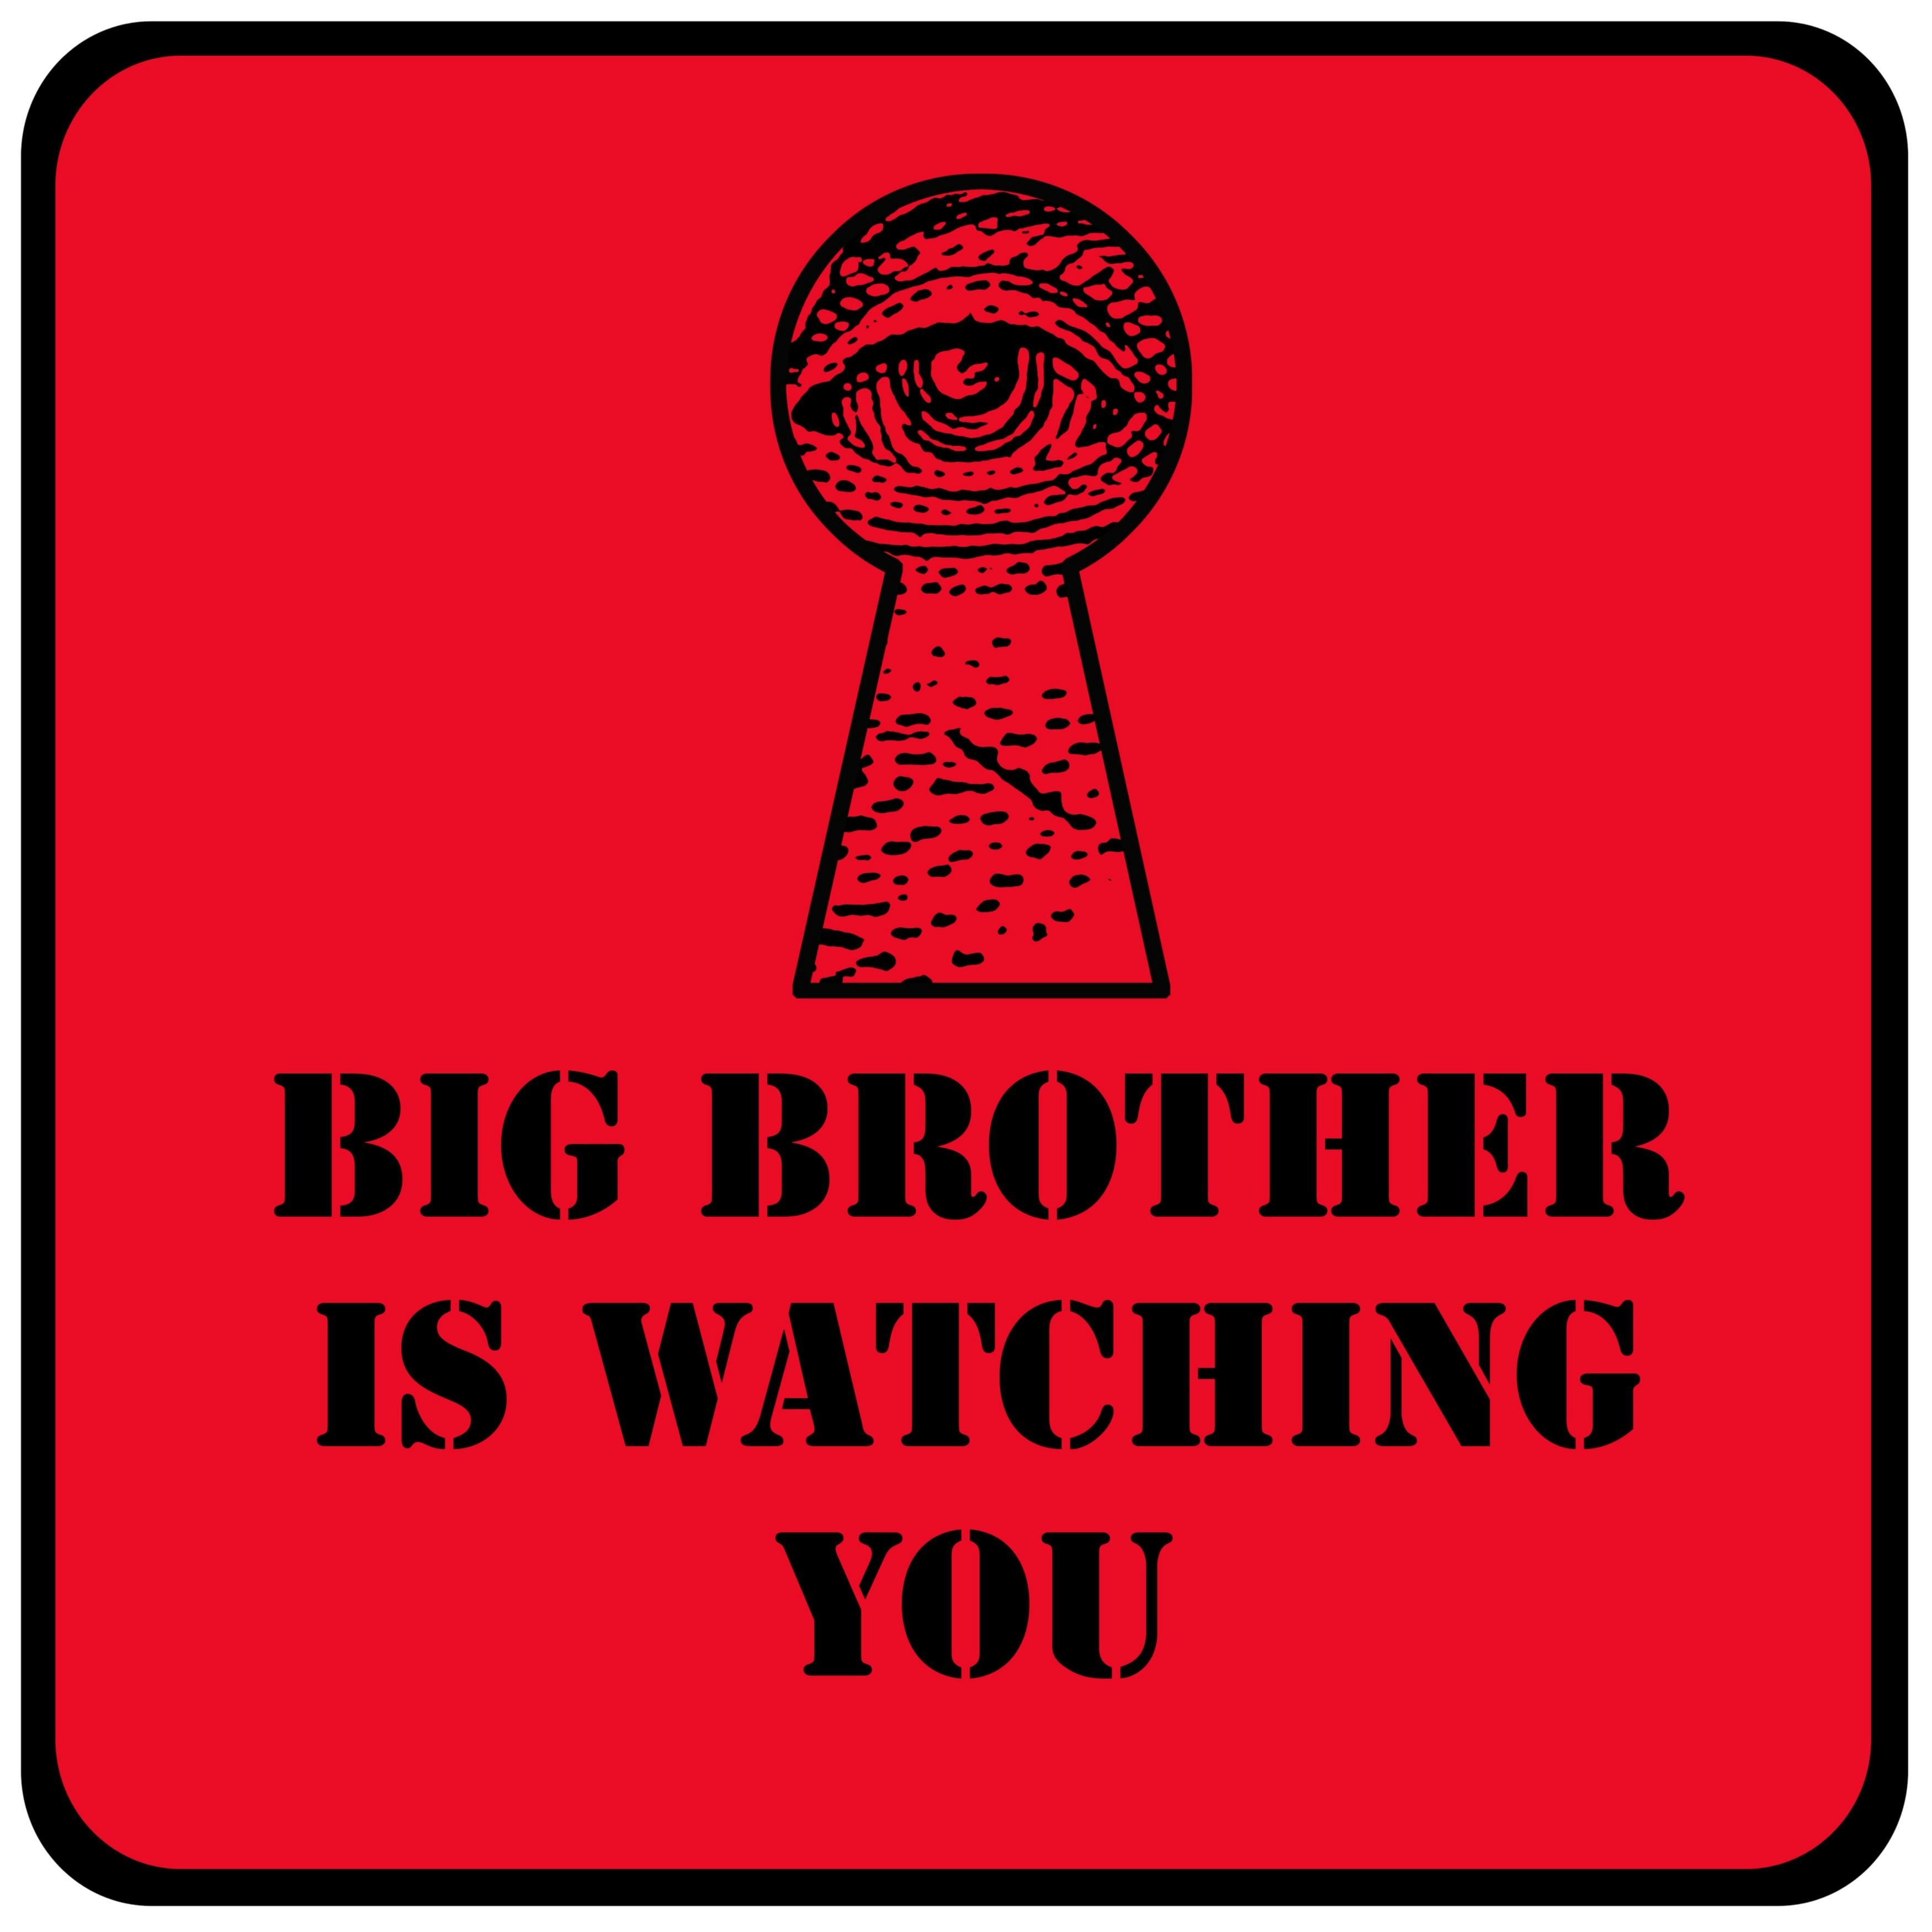 /big-brother-meets-black-mirror-in-the-middle-kingdom-3febe4574467 feature image